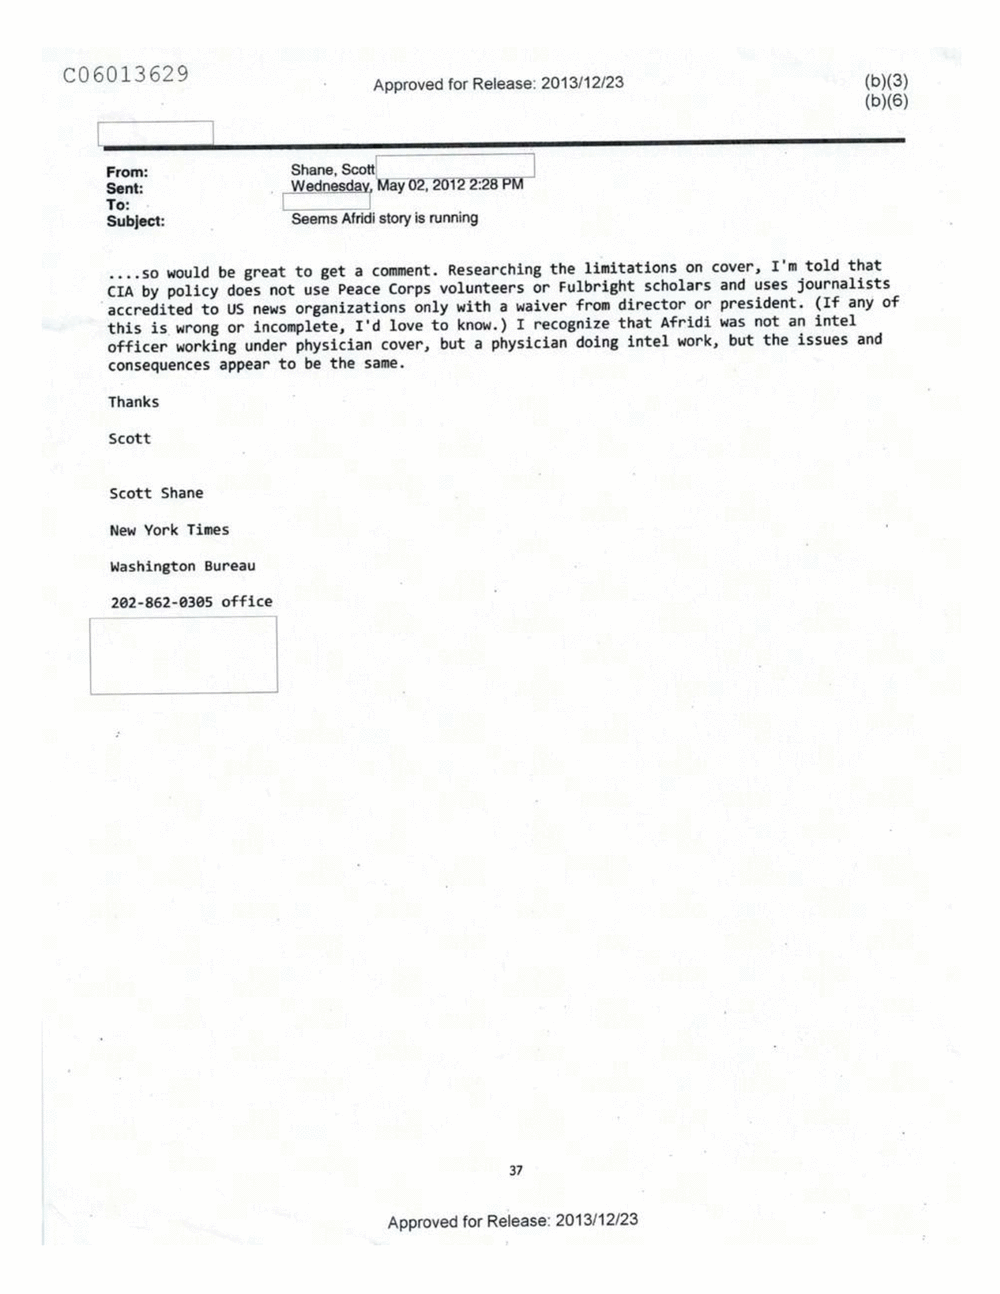 Page 466 from Email Correspondence Between Reporters and CIA Flacks